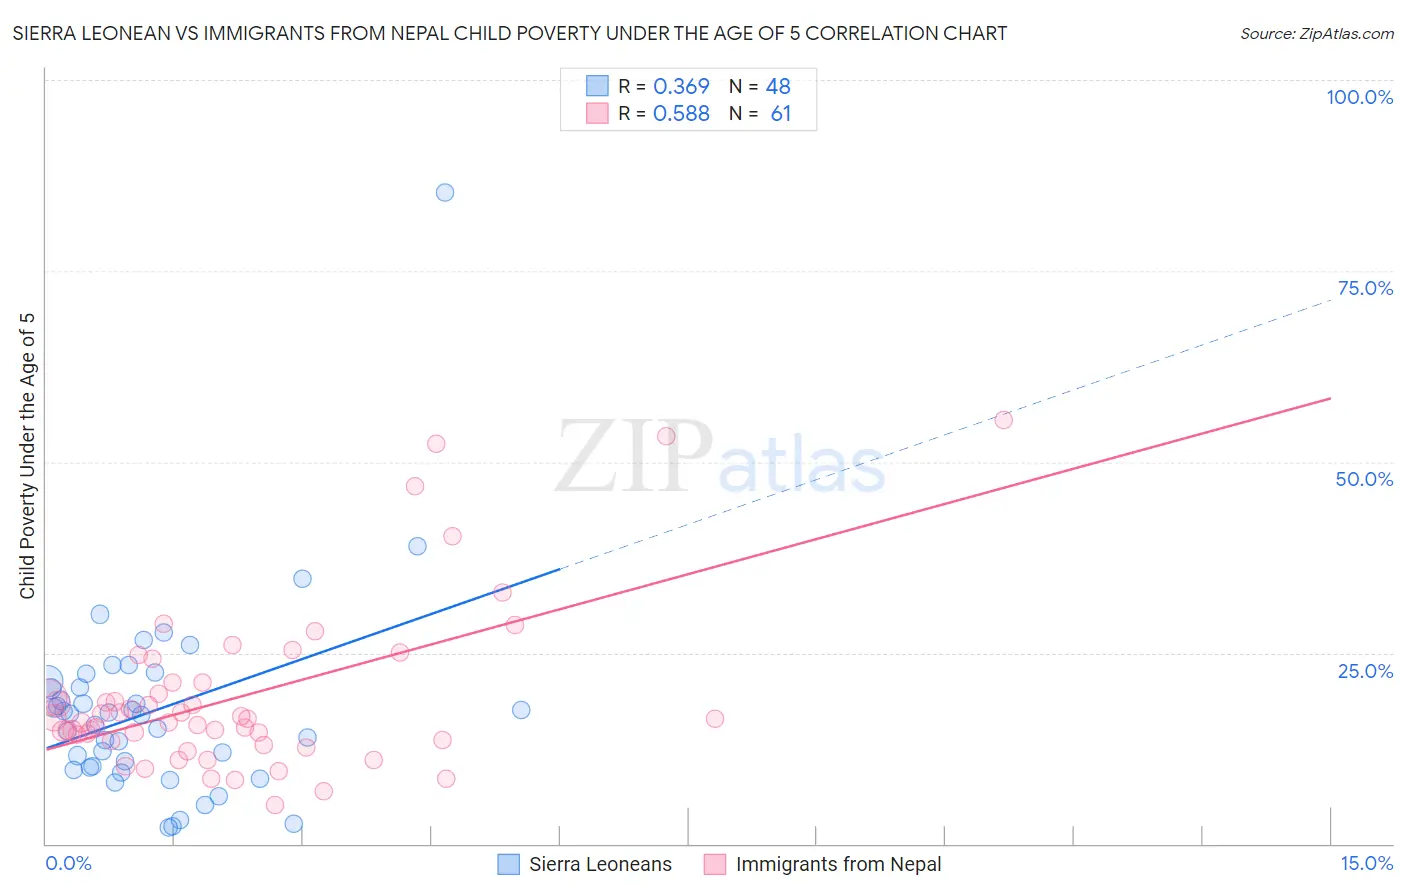 Sierra Leonean vs Immigrants from Nepal Child Poverty Under the Age of 5